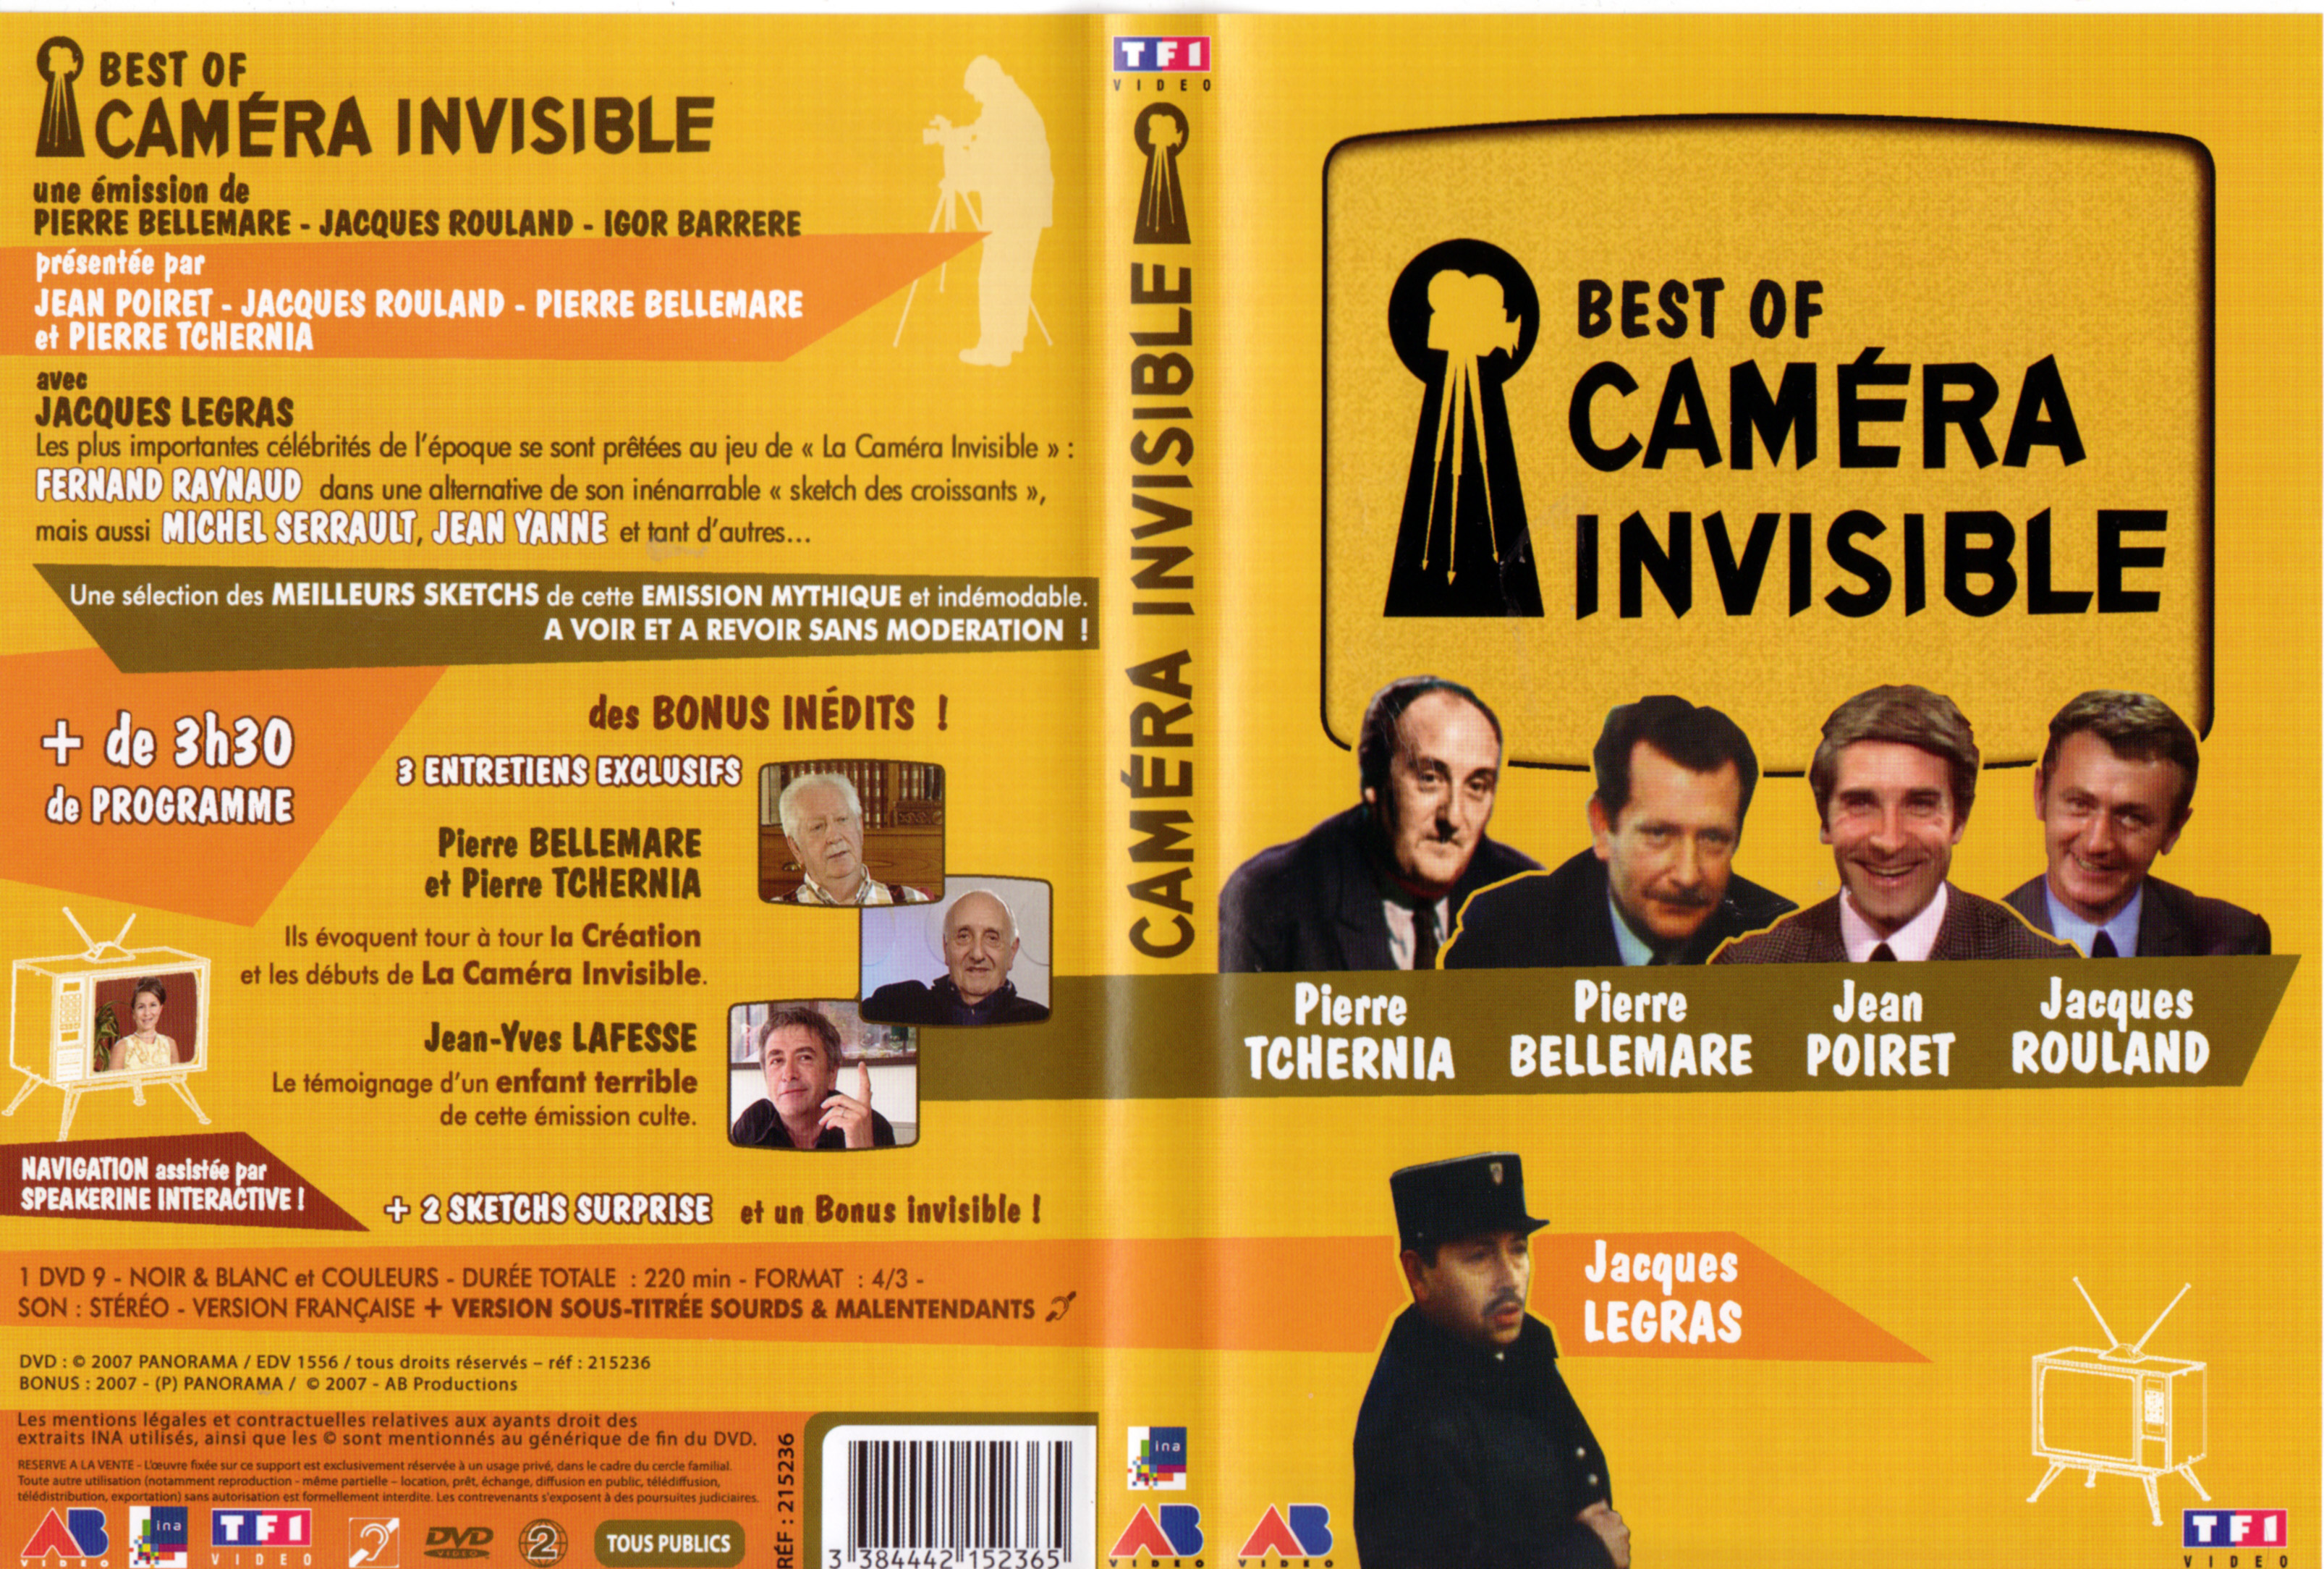 Jaquette DVD Best of Camera Invisible